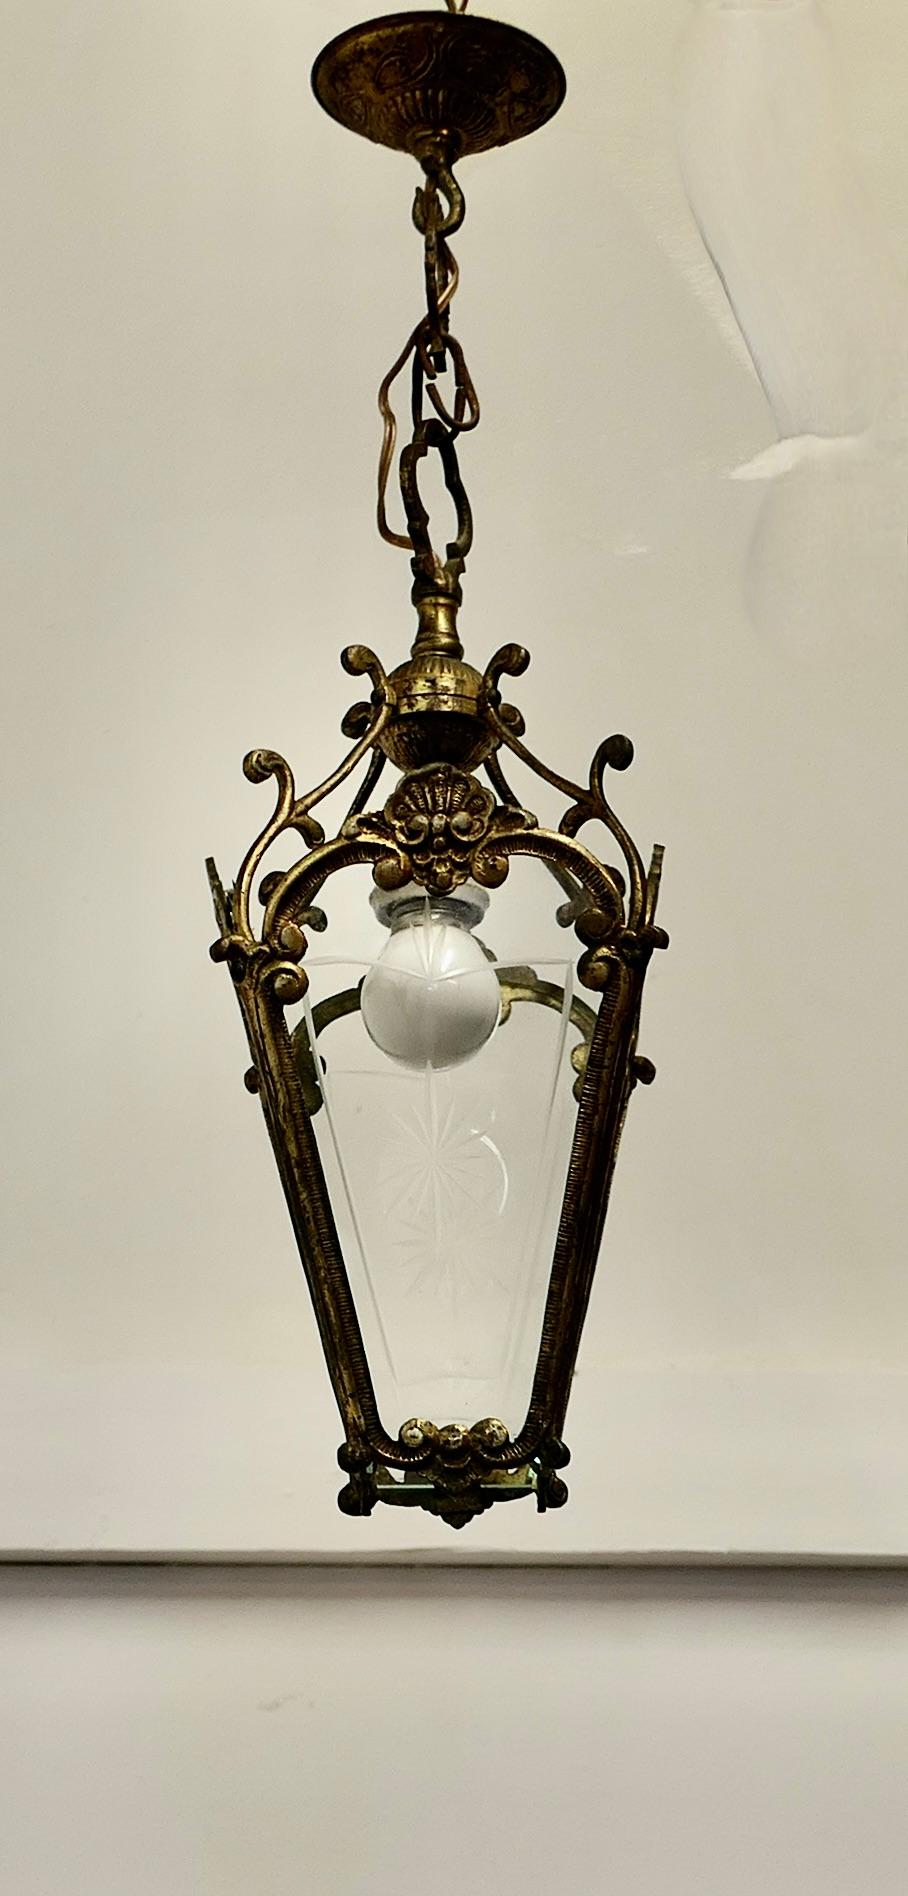 A Superb Quality Brass and Etched Glass Lantern

This lovely light is on a short chain, it has 4 flat etched glass panels, they are all cut with a centre starburst and a bordered edge, the lantern gives a sensational bright light when lit

The brass